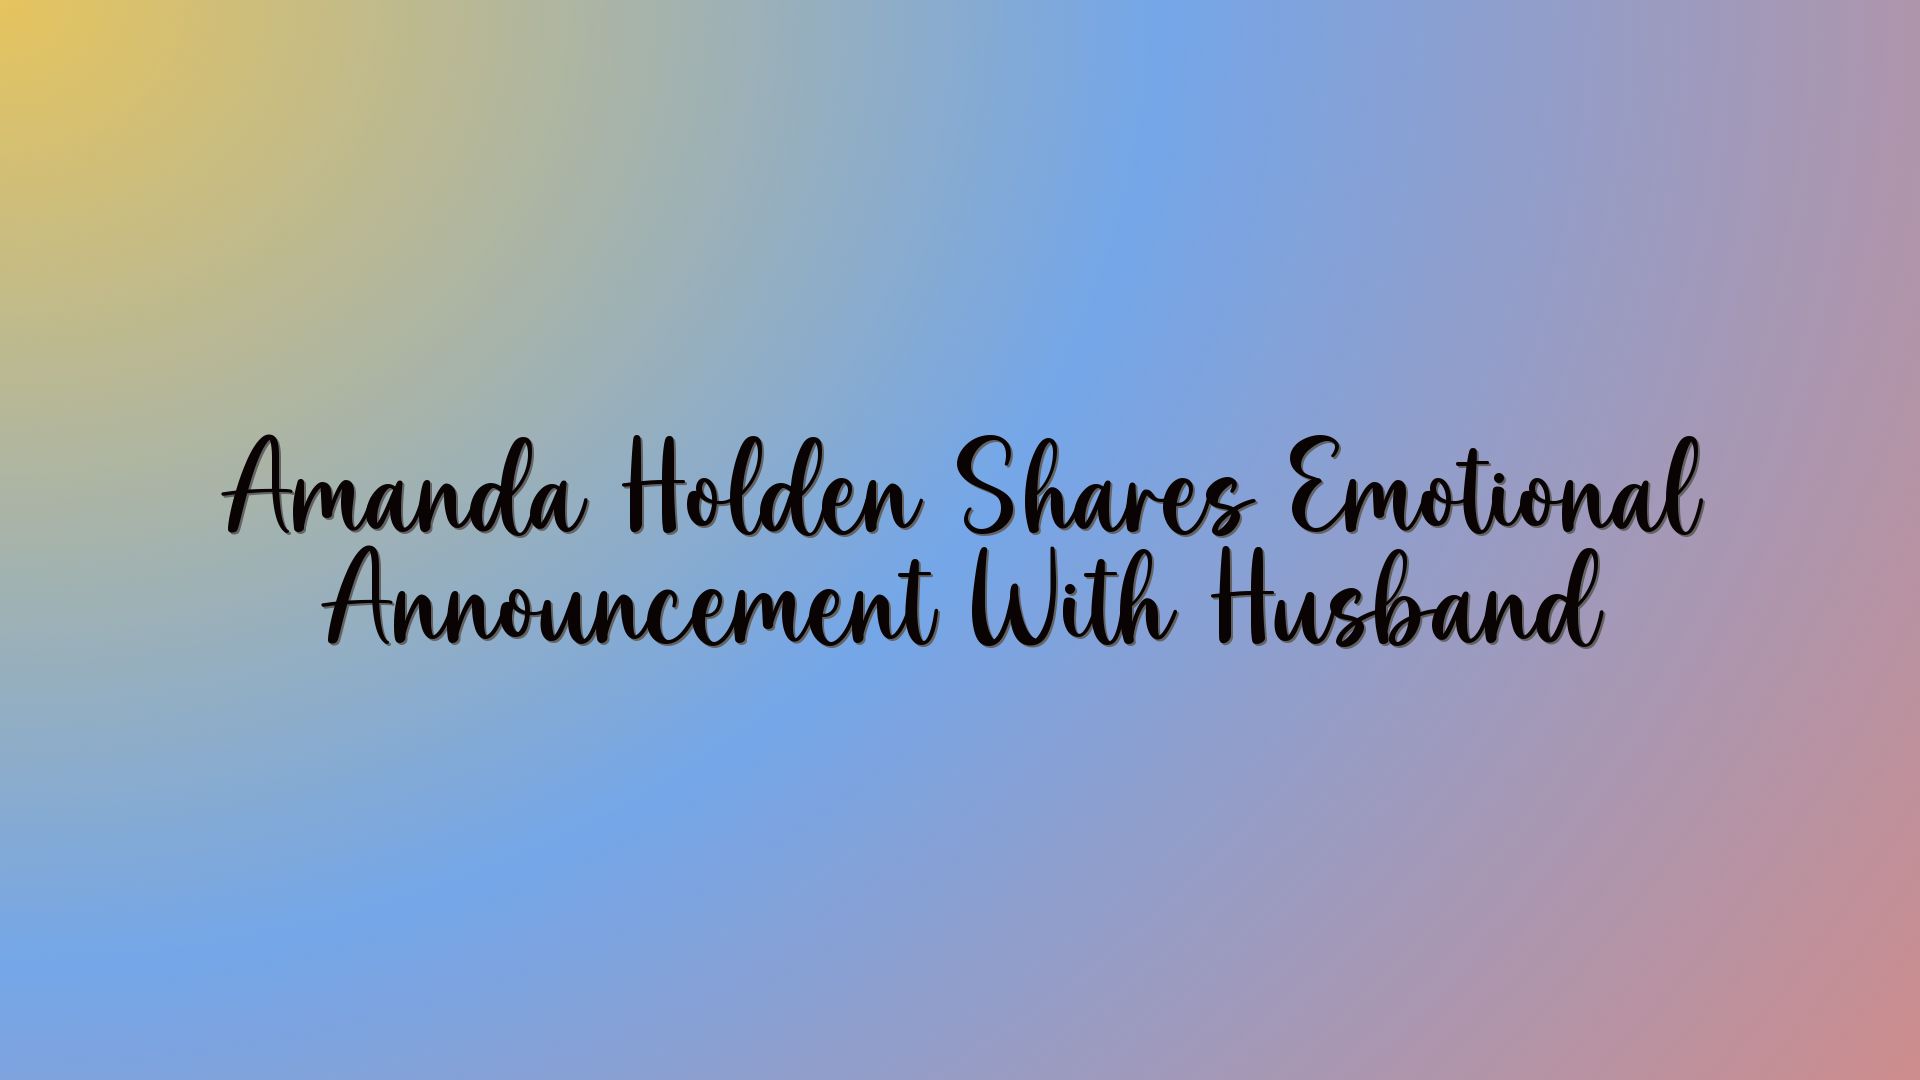 Amanda Holden Shares Emotional Announcement With Husband